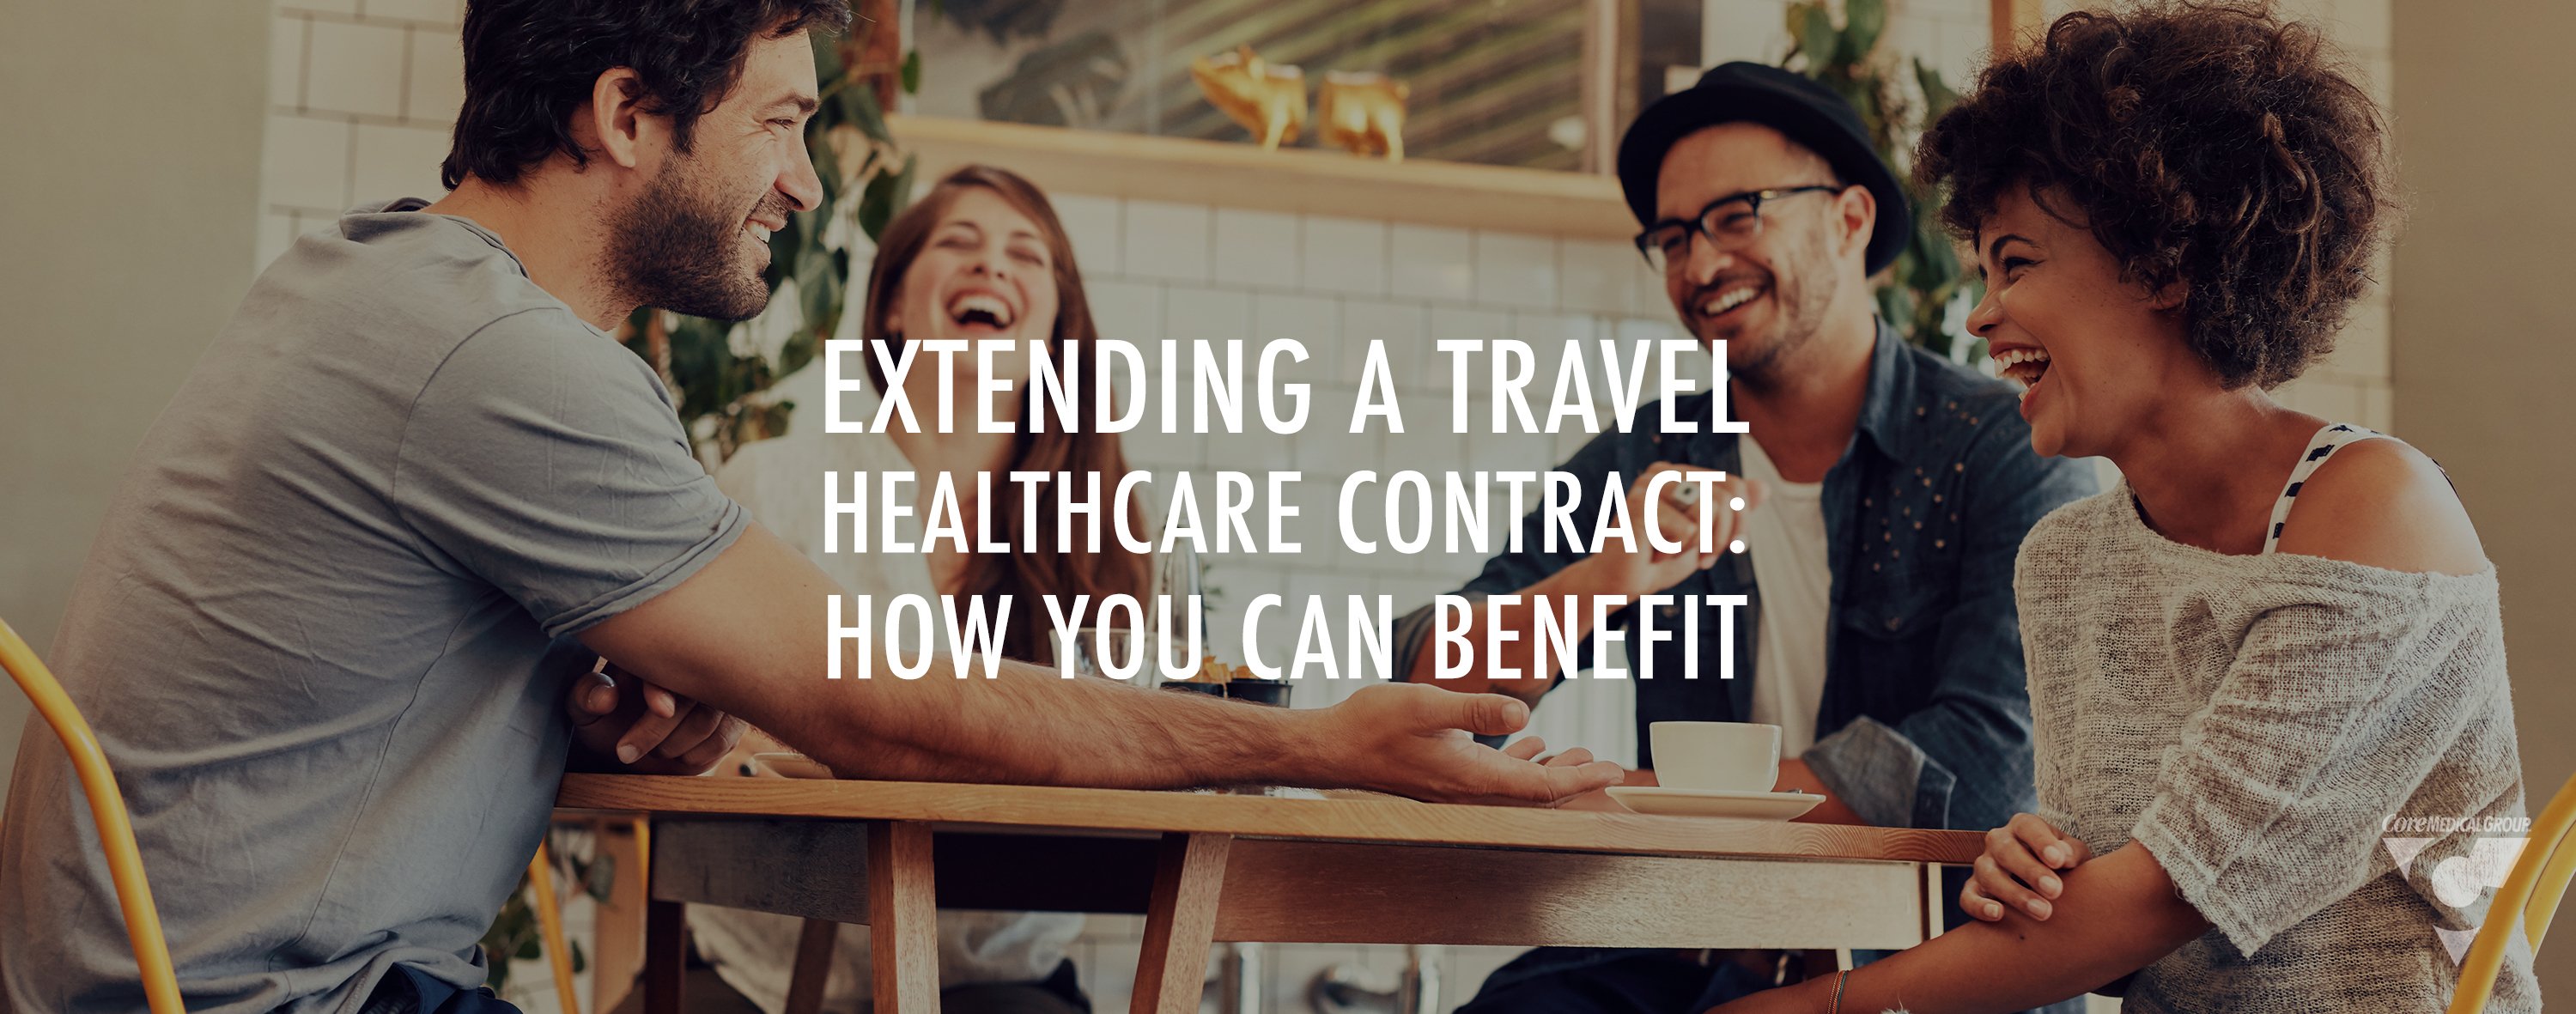 CMG_Blog_Featuredimages_Extending Travel Healthcare Contract_R1_Blog